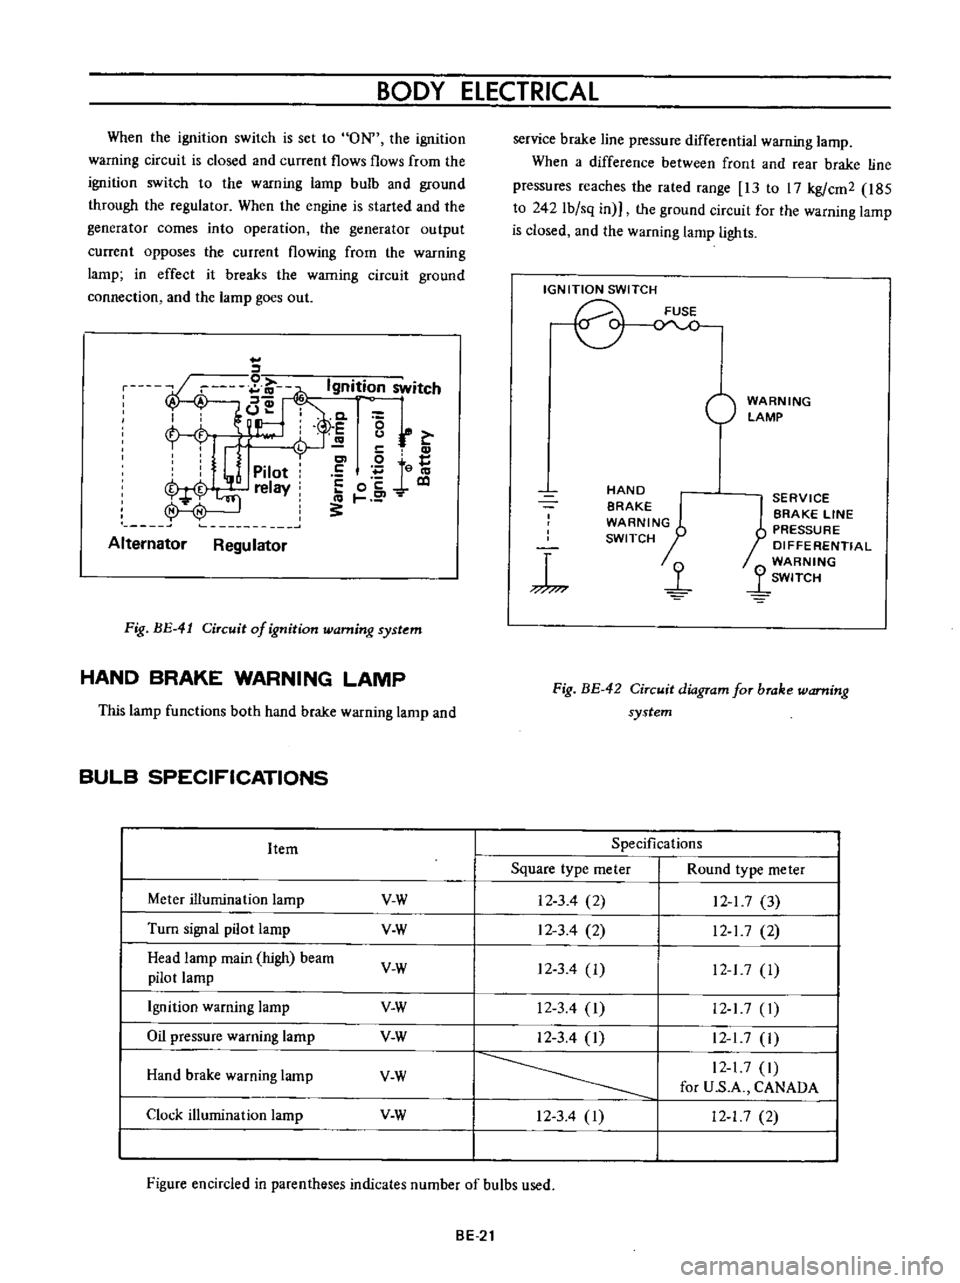 DATSUN B110 1973  Service Service Manual 
BODY 
ElECTRICAL

When 
the

ignition 
switch 
is 
set 
to 
ON 
the

ignition

wa

rning 
circuit 
is

closed 
and 
current 
flows 
flows 
from 
the

ignition 
switch 
to 
the

warning 
lamp 
bulb

a